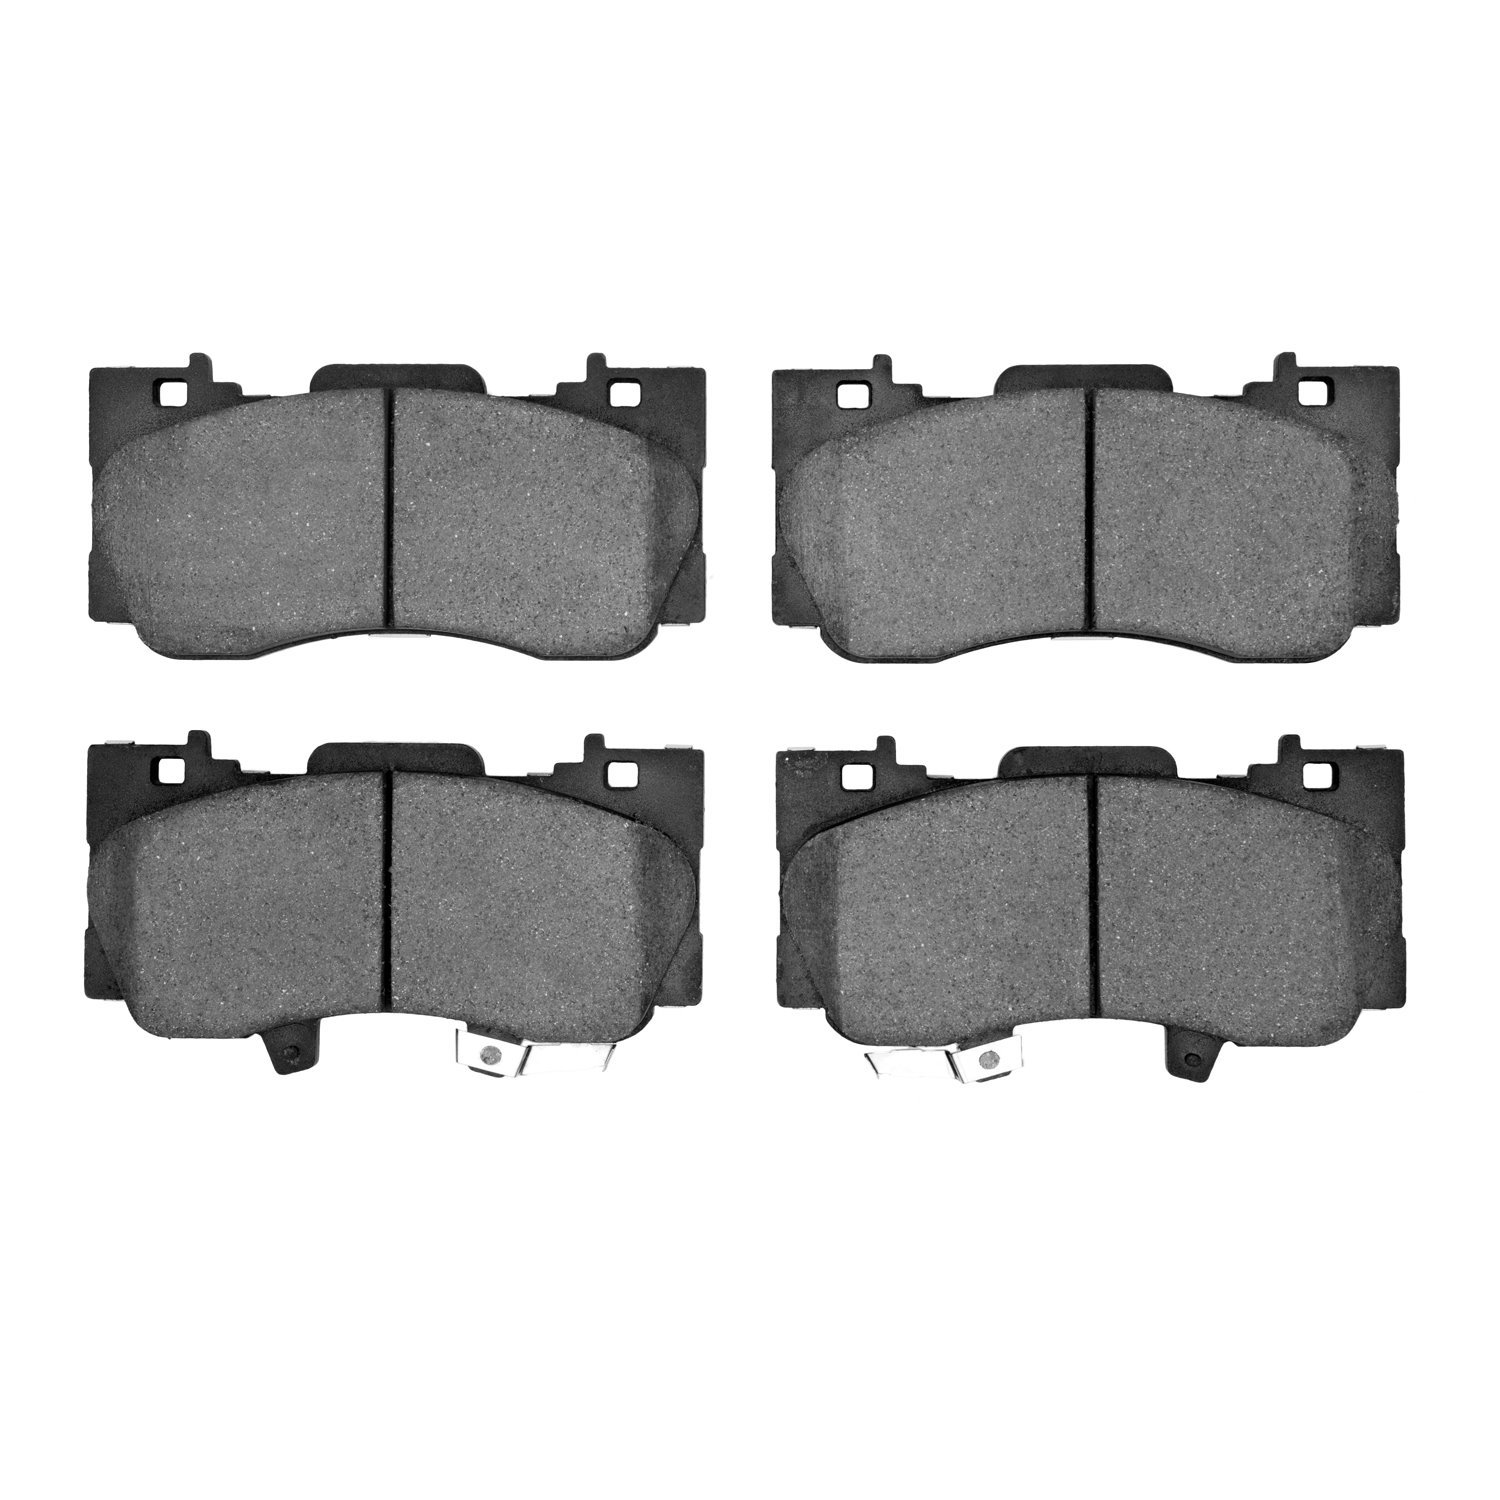 Track/Street Brake Pads, Fits Select Ford/Lincoln/Mercury/Mazda, Position: Front